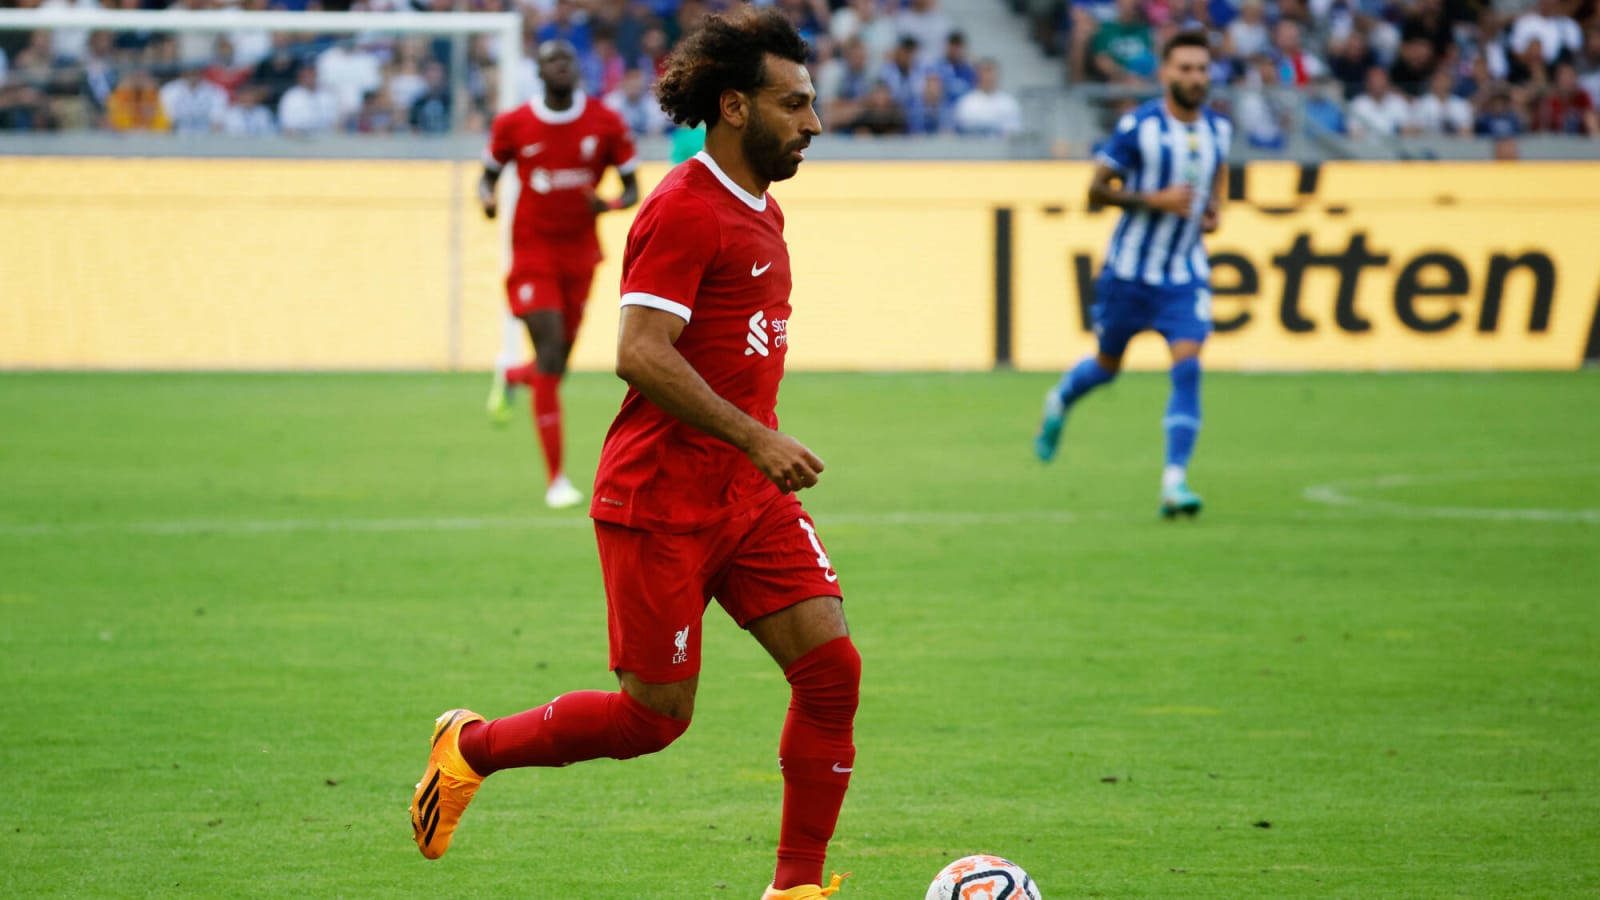 'I think it’s not dangerous' – Egypt coach reacts to Mohamed Salah’s injury